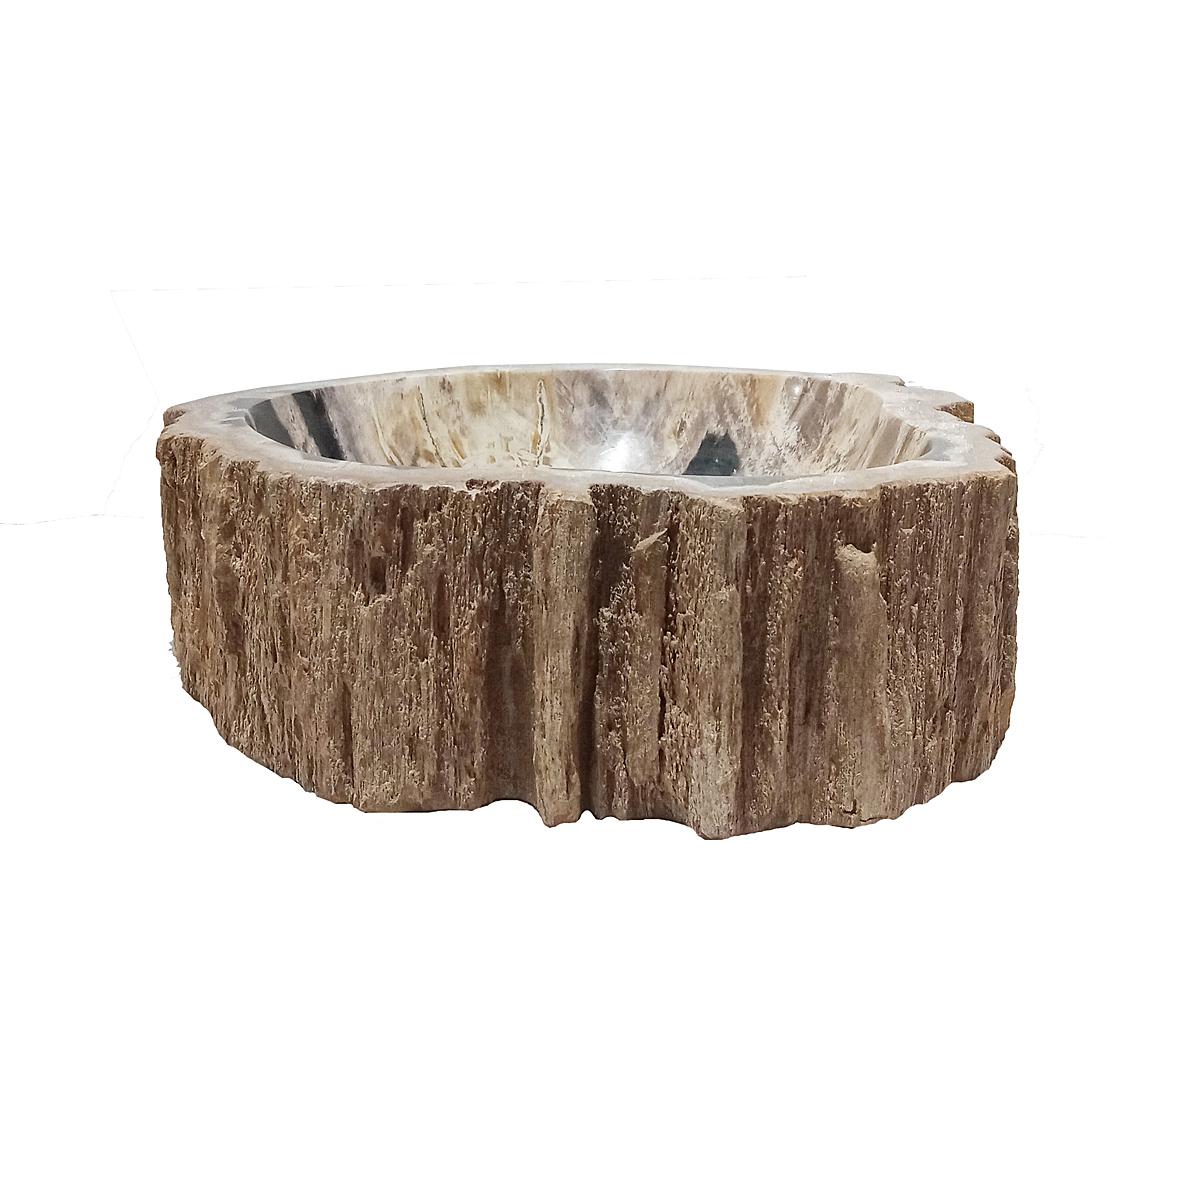 One of the most beautiful materials on earth is the Indonesian petrified wood. It is probably one of the most durable woods in the world because it is actually stone. Indonesian fossil wood is 25 million years old but still looks like new. The wood